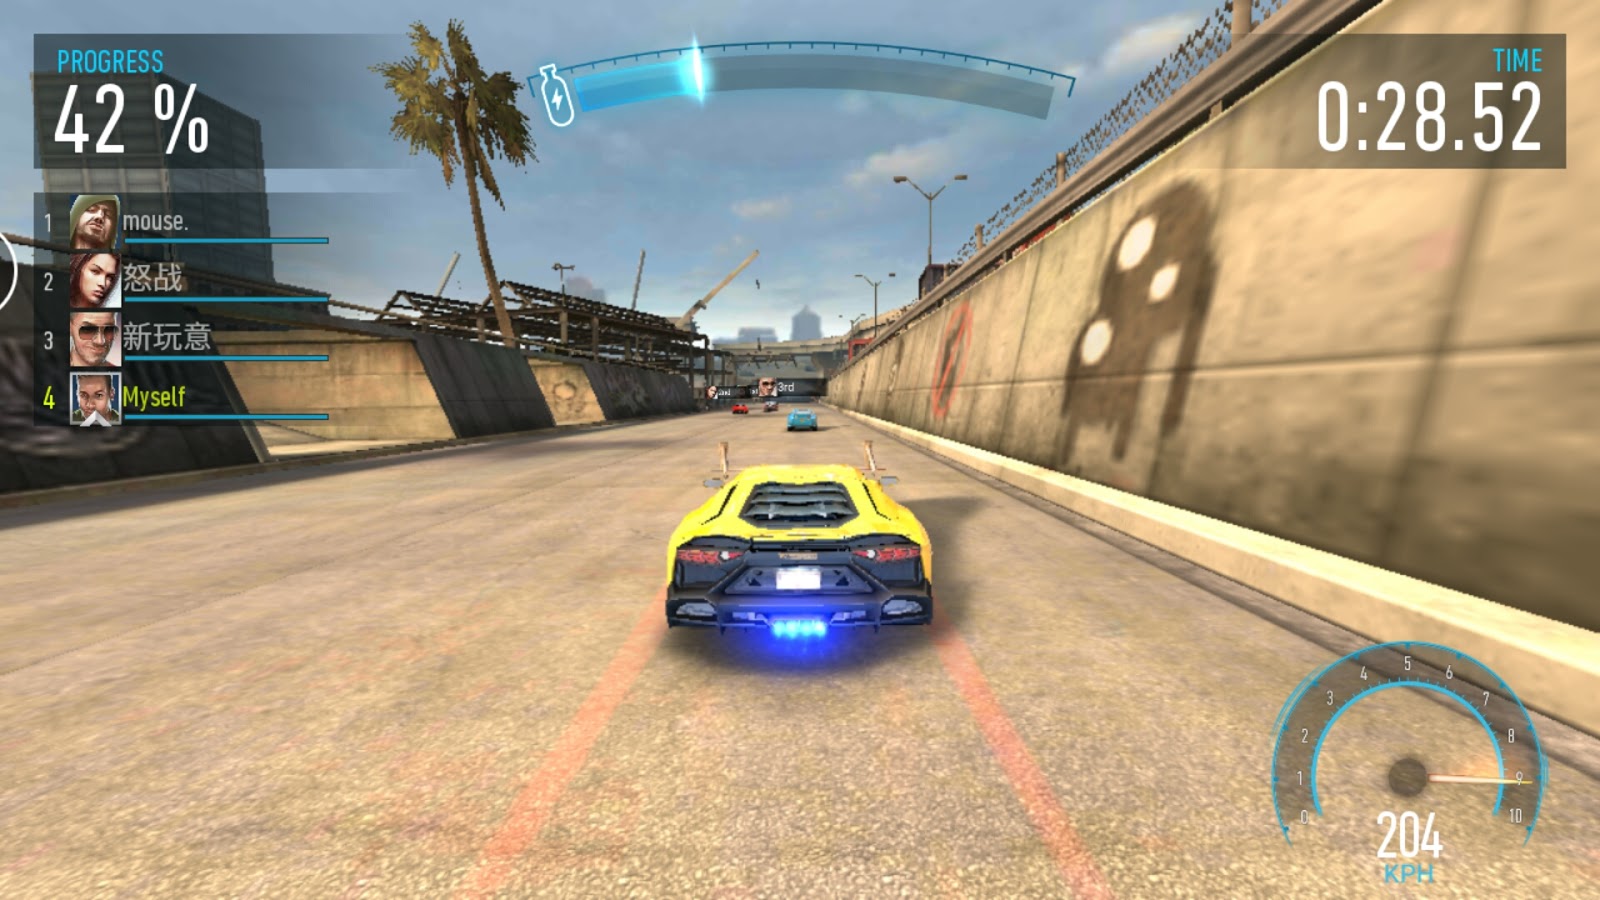 Nfs 2 mobile. NFS Edge mobile. Need for Speed: Edge. Need for Speed: Edge mobile. Need for Speed Edge ПК.